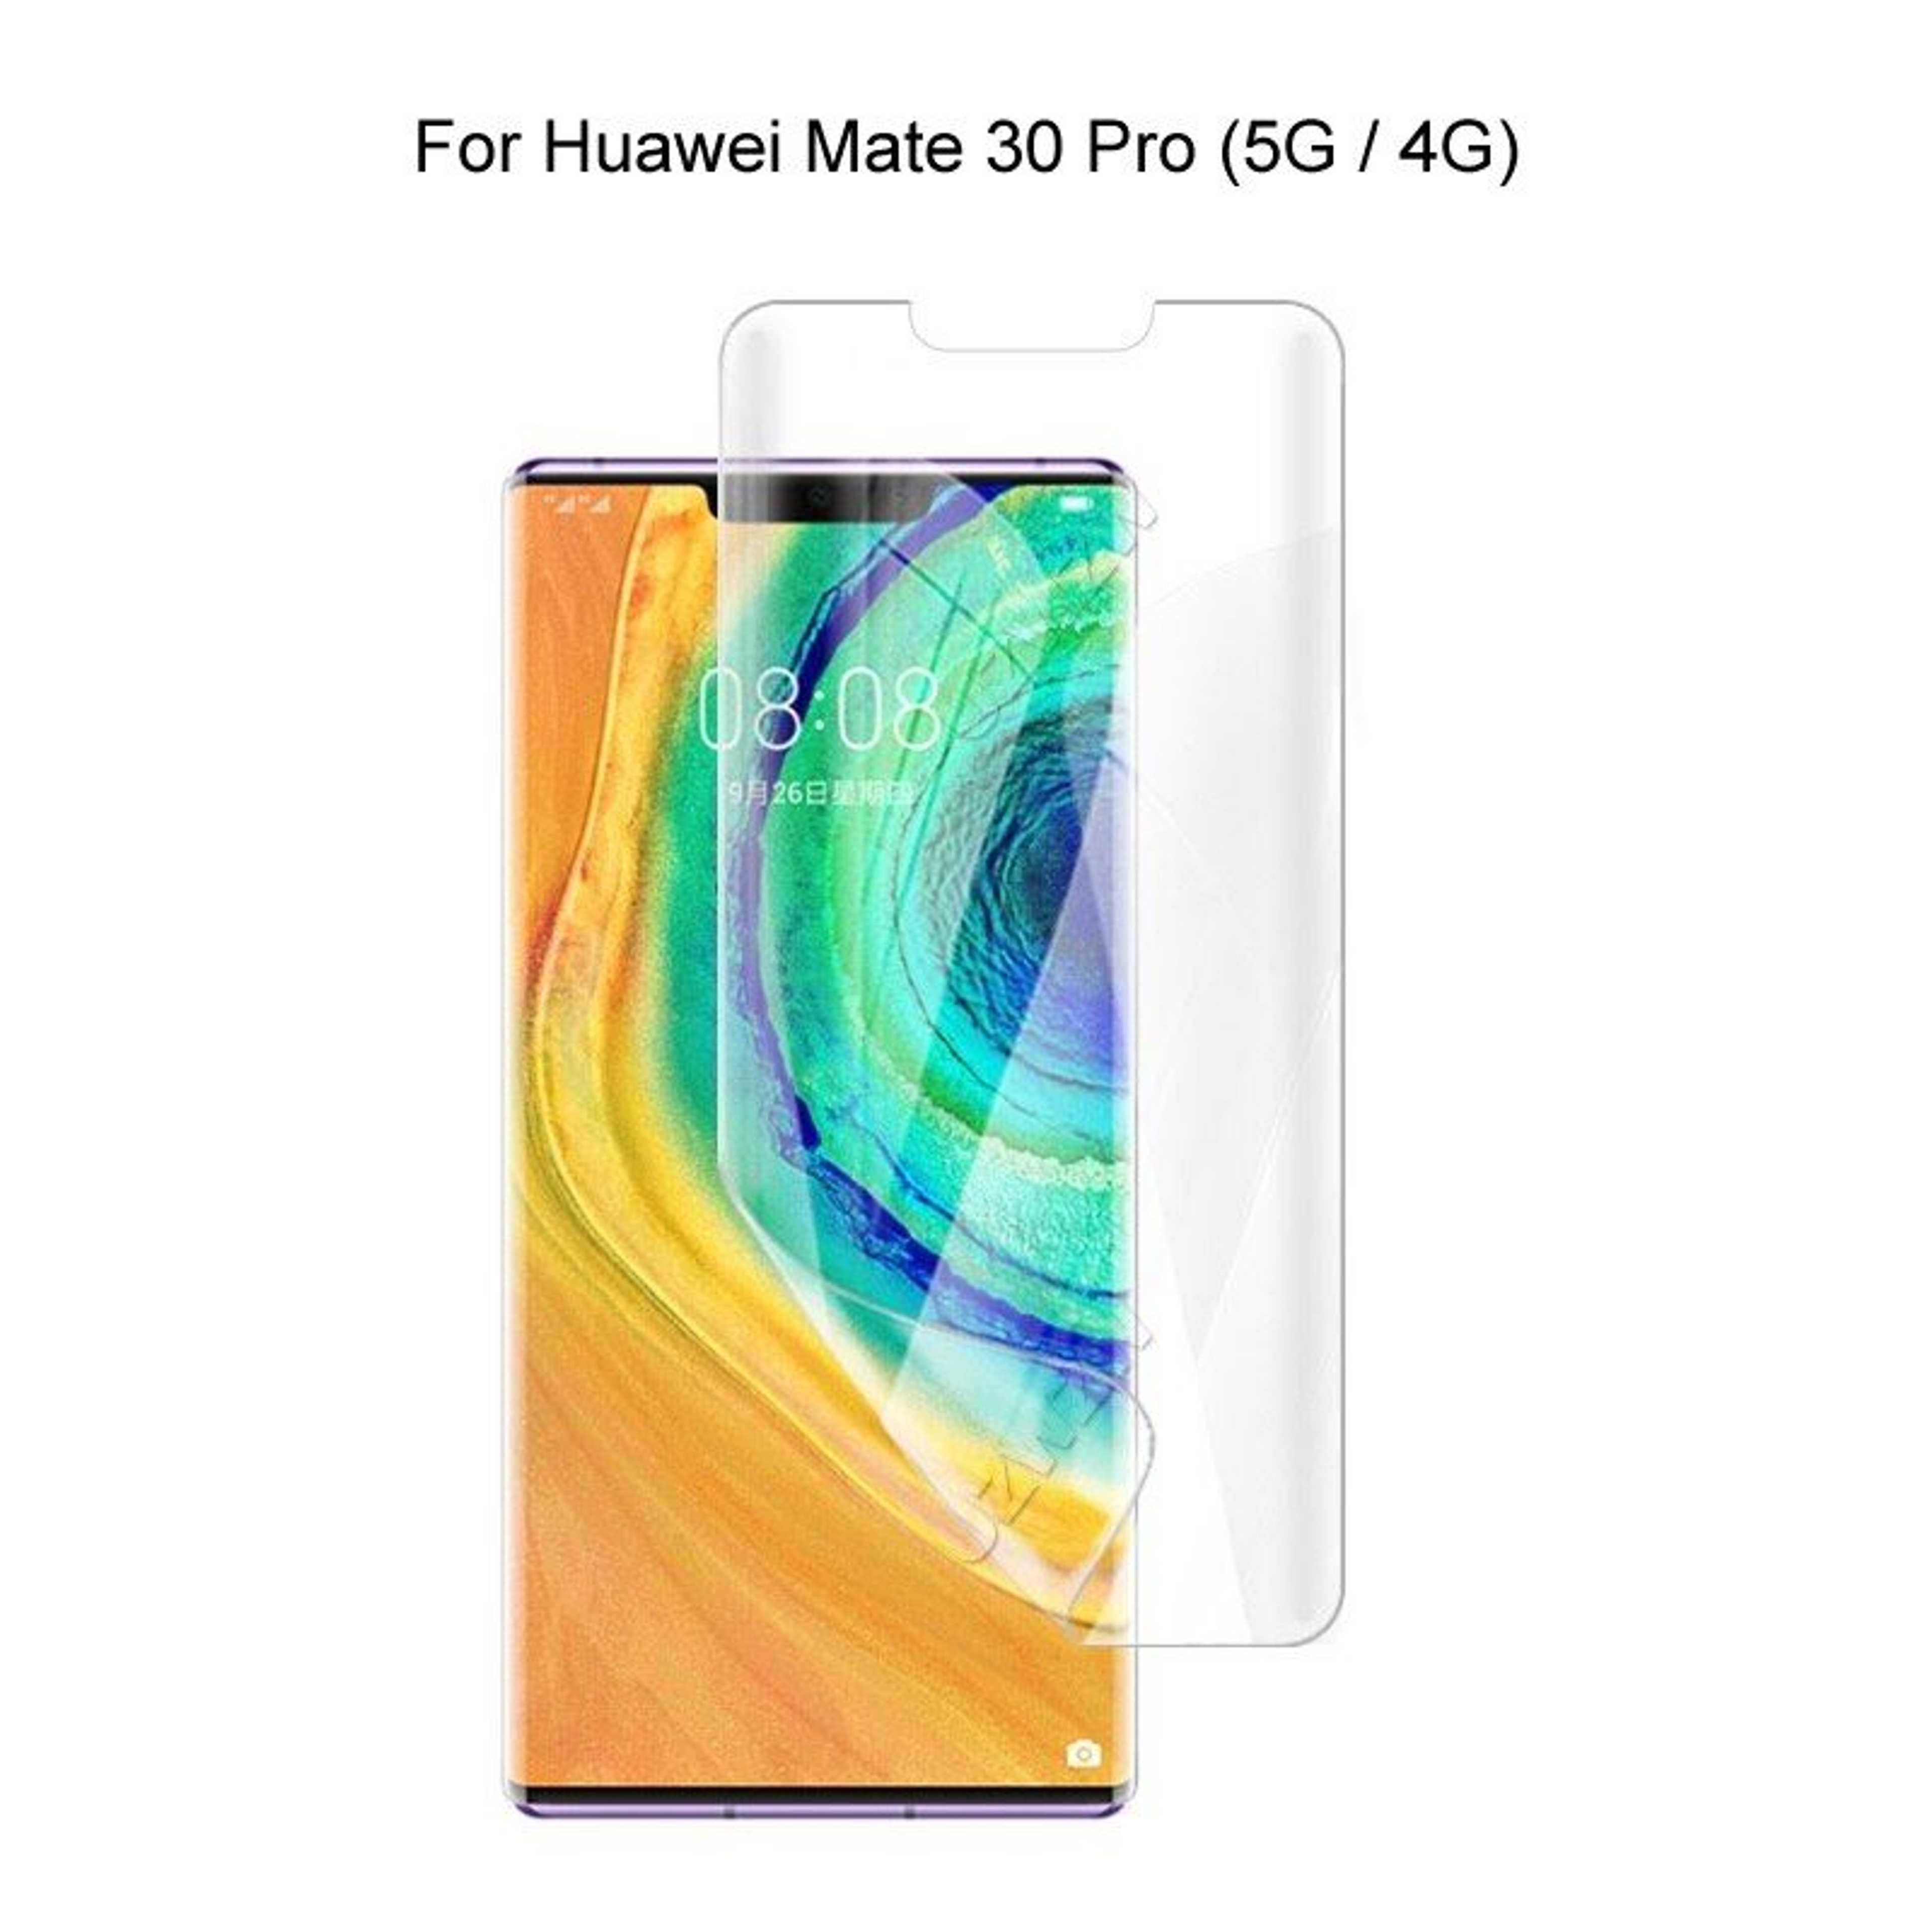 Huawei Mate 30 Pro 5G Screen Protector Jelly Protector For Huawei Mate 30 Pro 5G